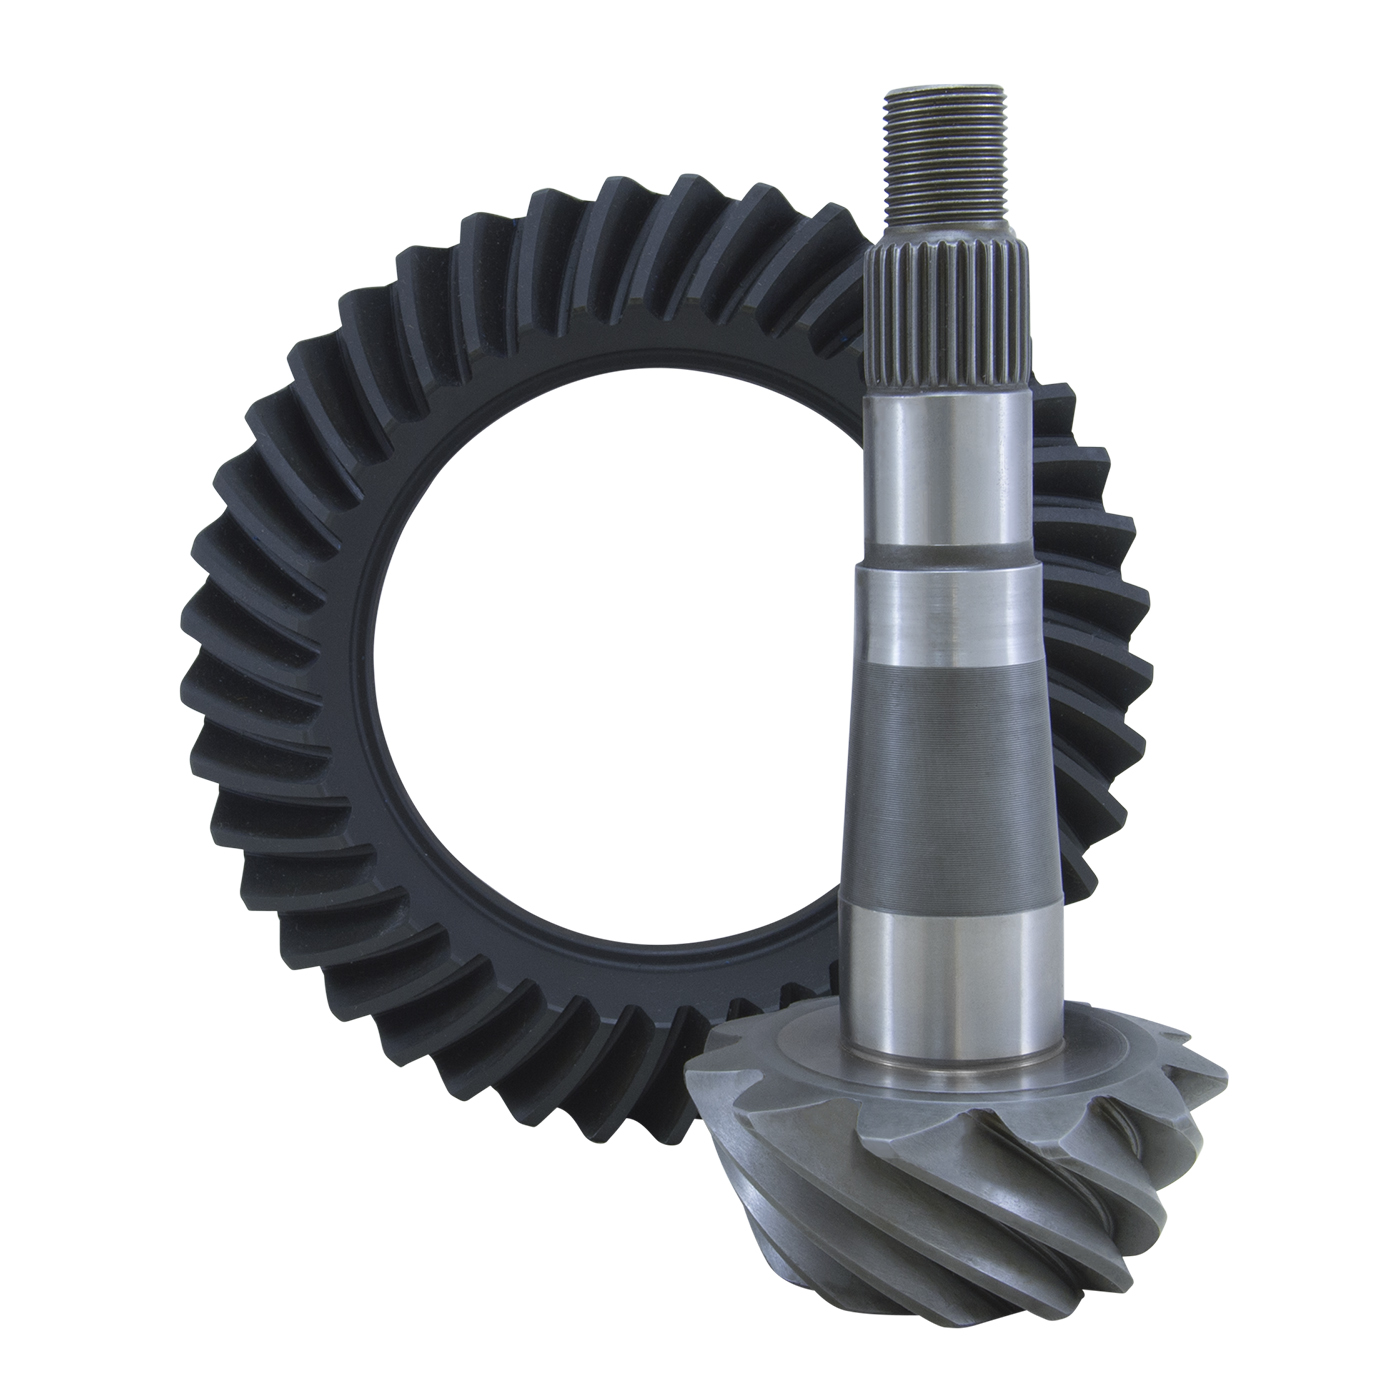 1 Penn Part # 19-5000CLL or 1326722 Pinion Gear Fits CLL5000 海外 即決 - スキル、知識